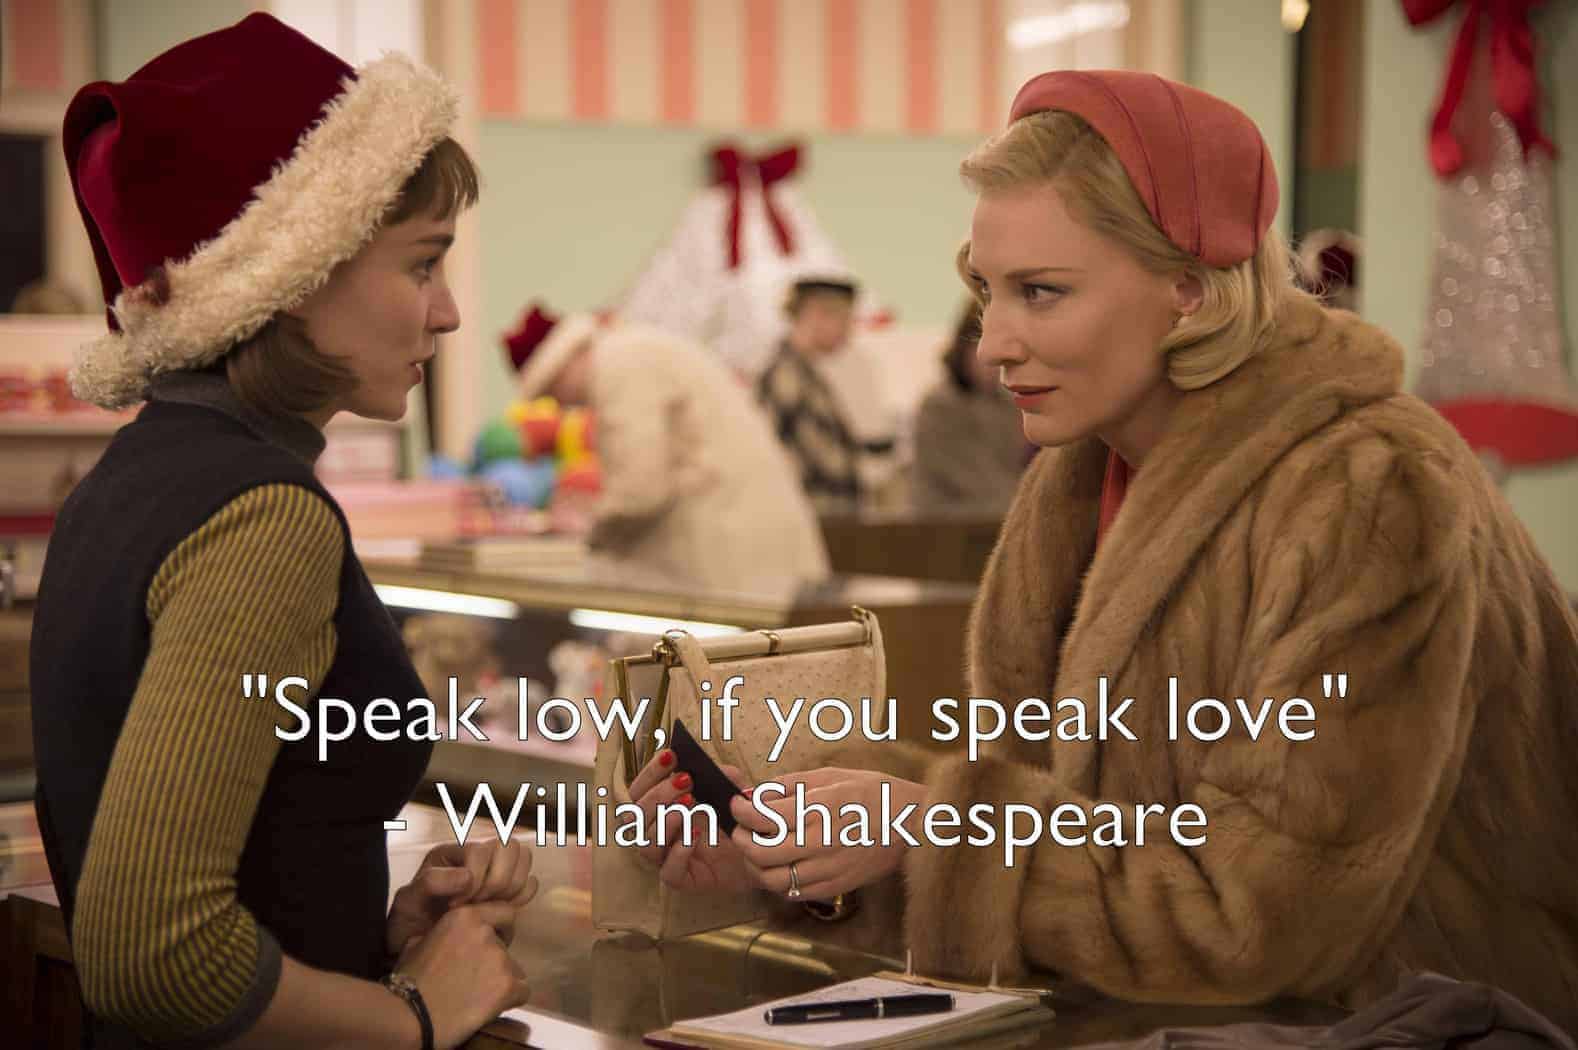 2015 films according to Shakespeare